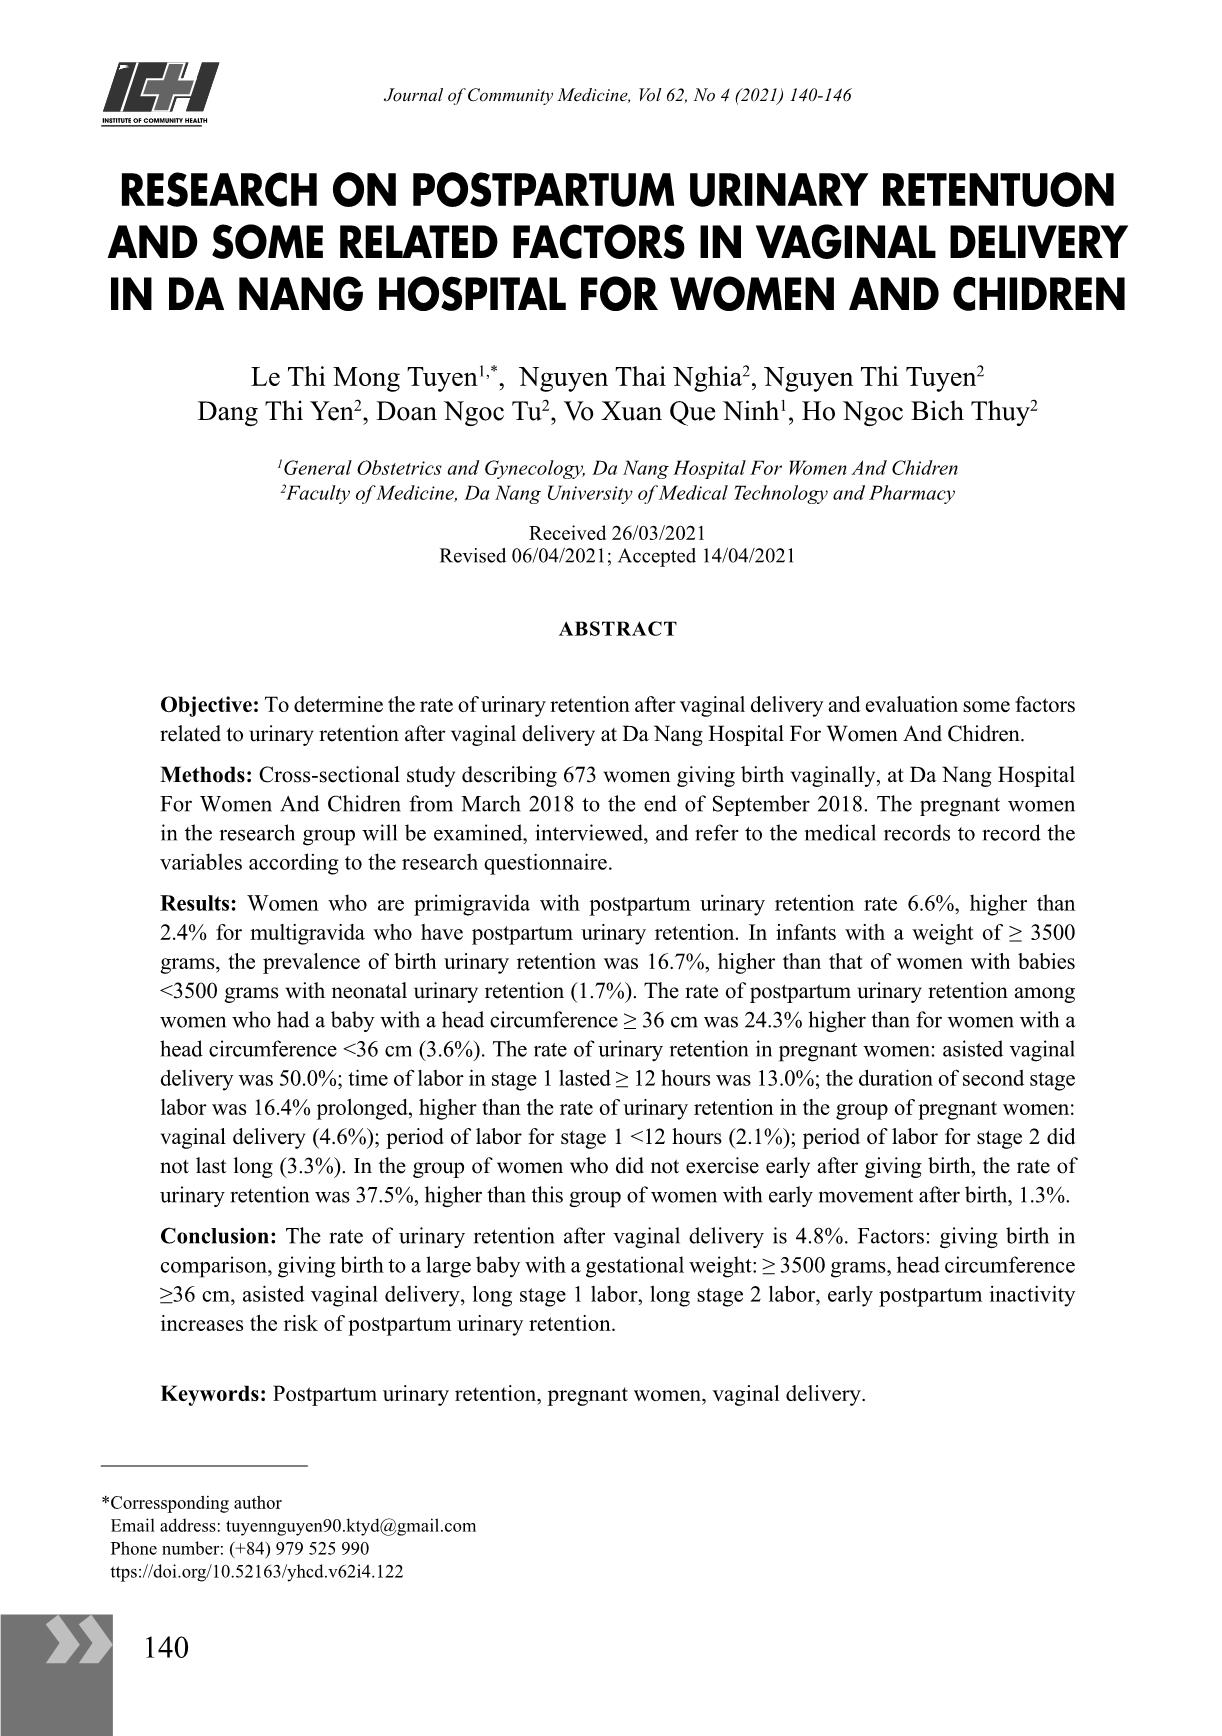 Research on postpartum urinary retentuon and some related factors in vaginal delivery in Da Nang hospital for women and chidren trang 1